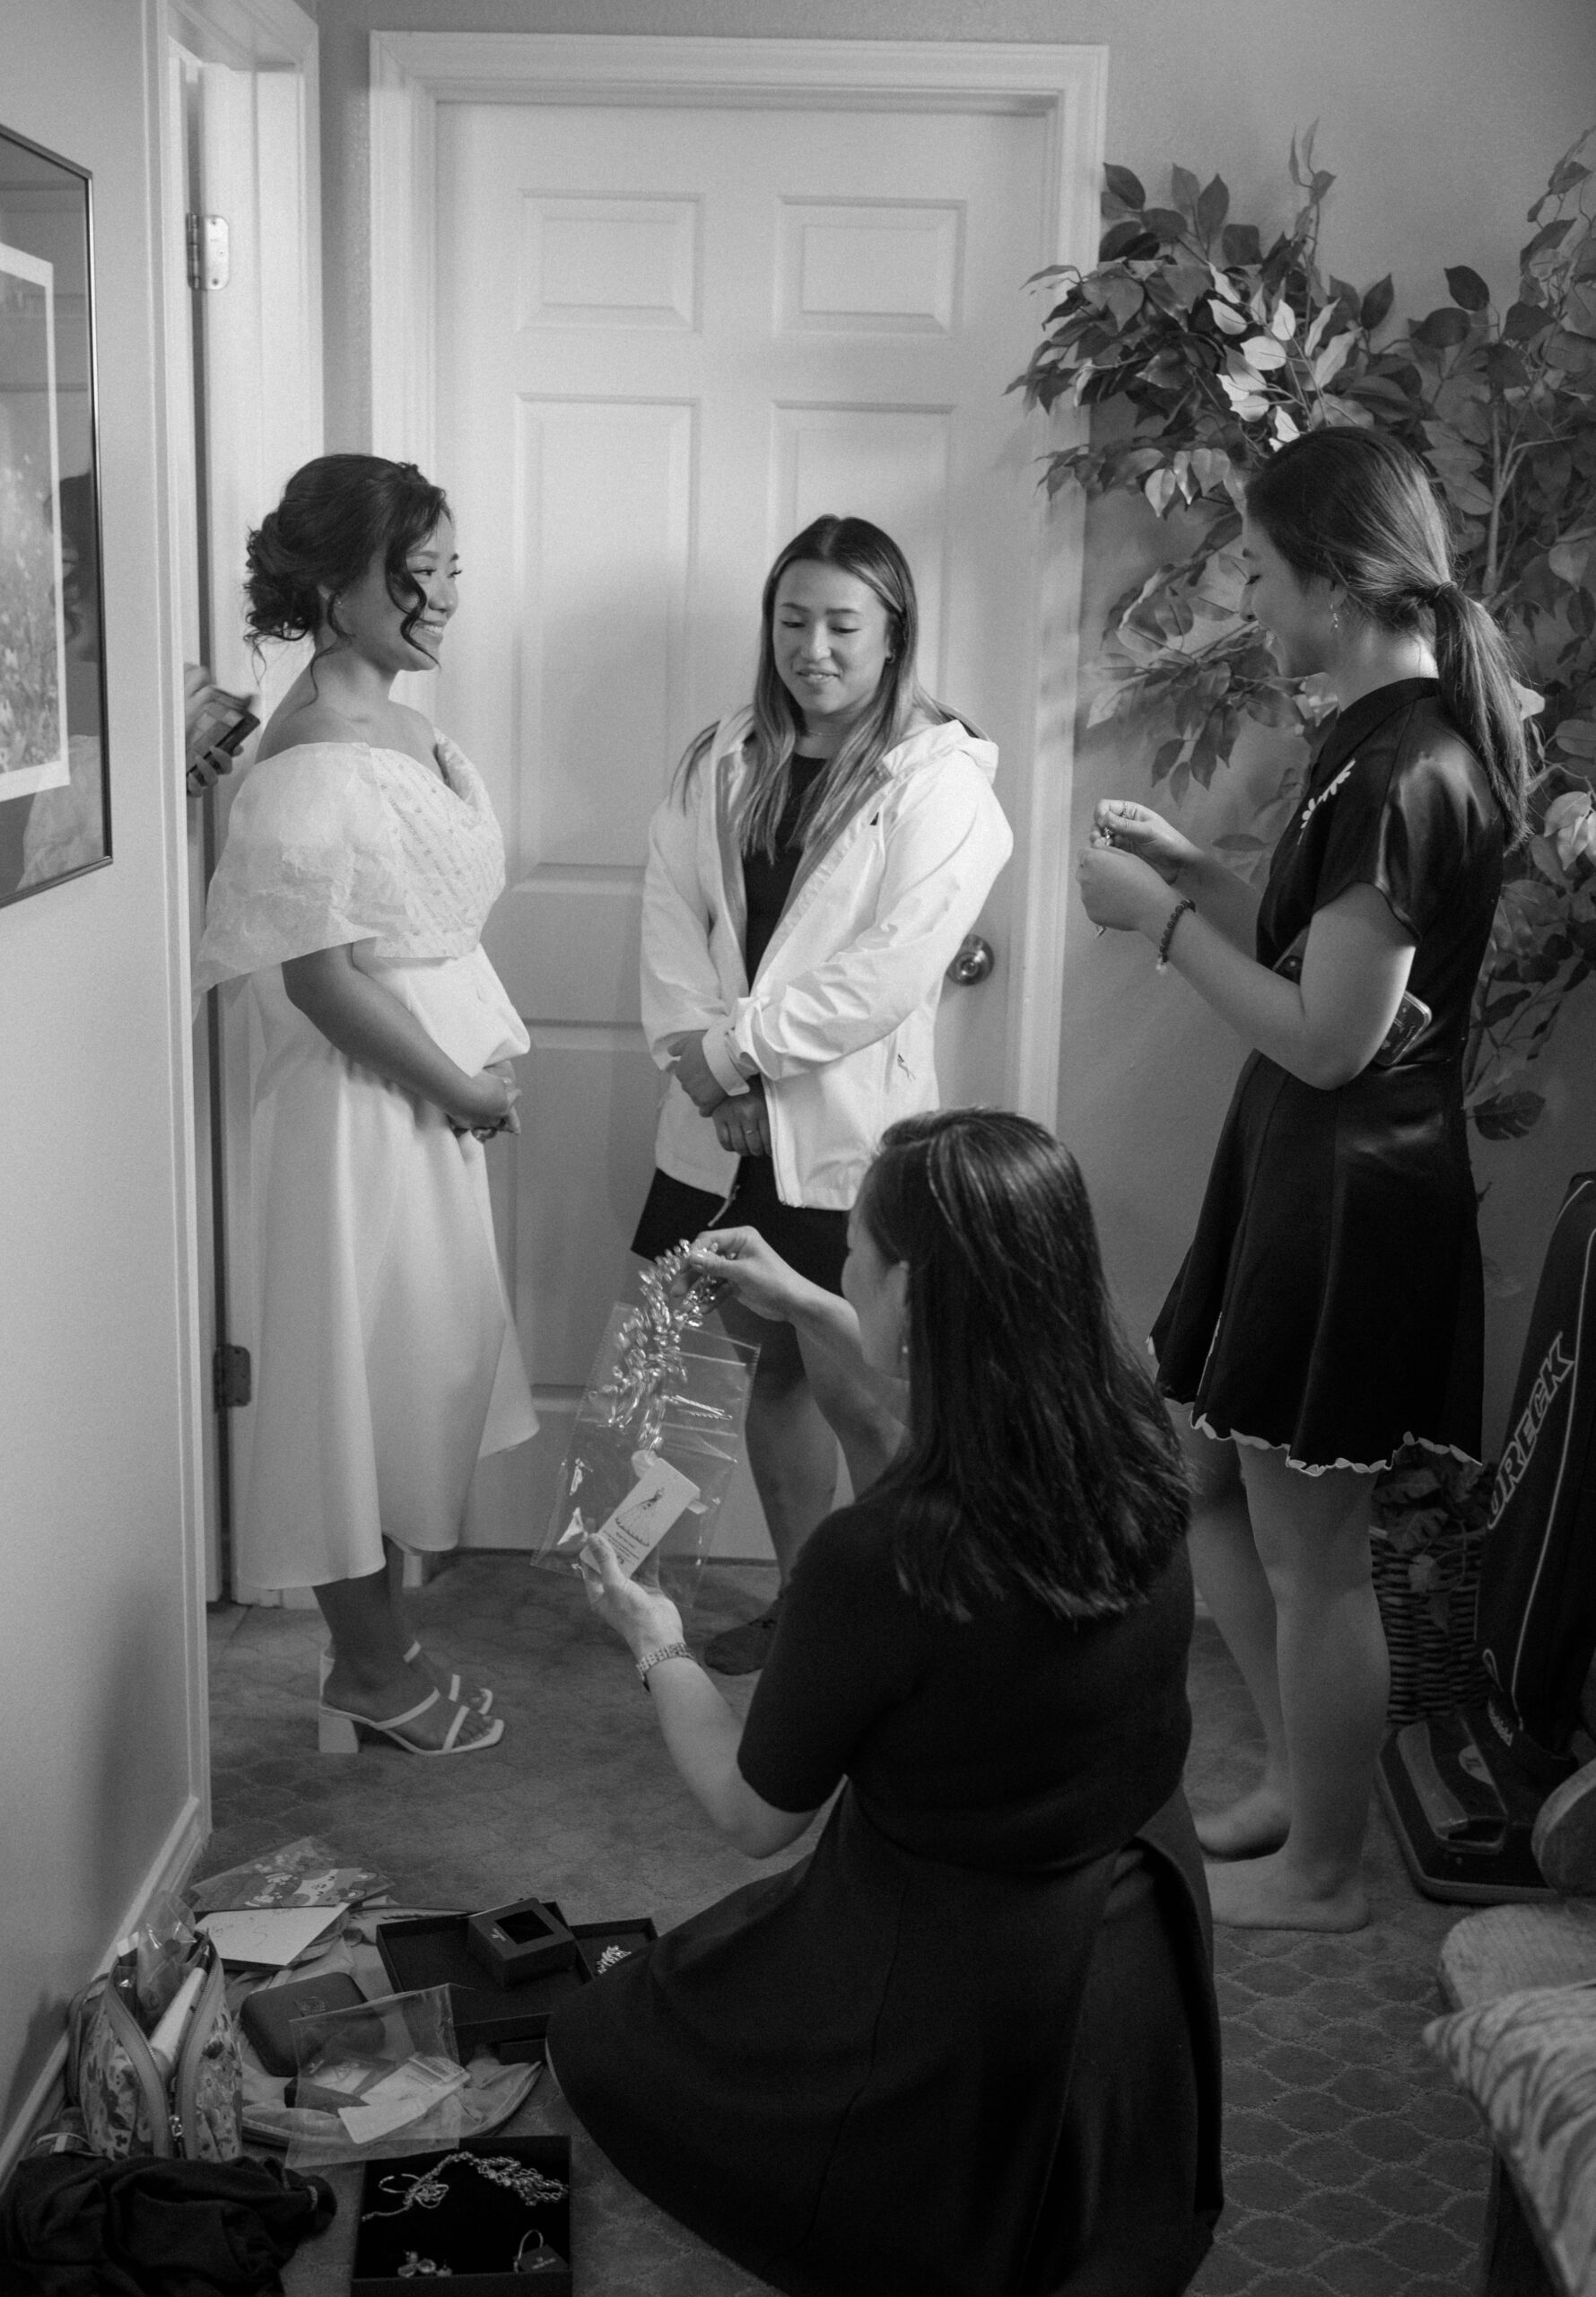 A black and white photograph of a bride getting ready on her Austin wedding day. She is surrounded by her friends helping her get dressed and do her makeup.